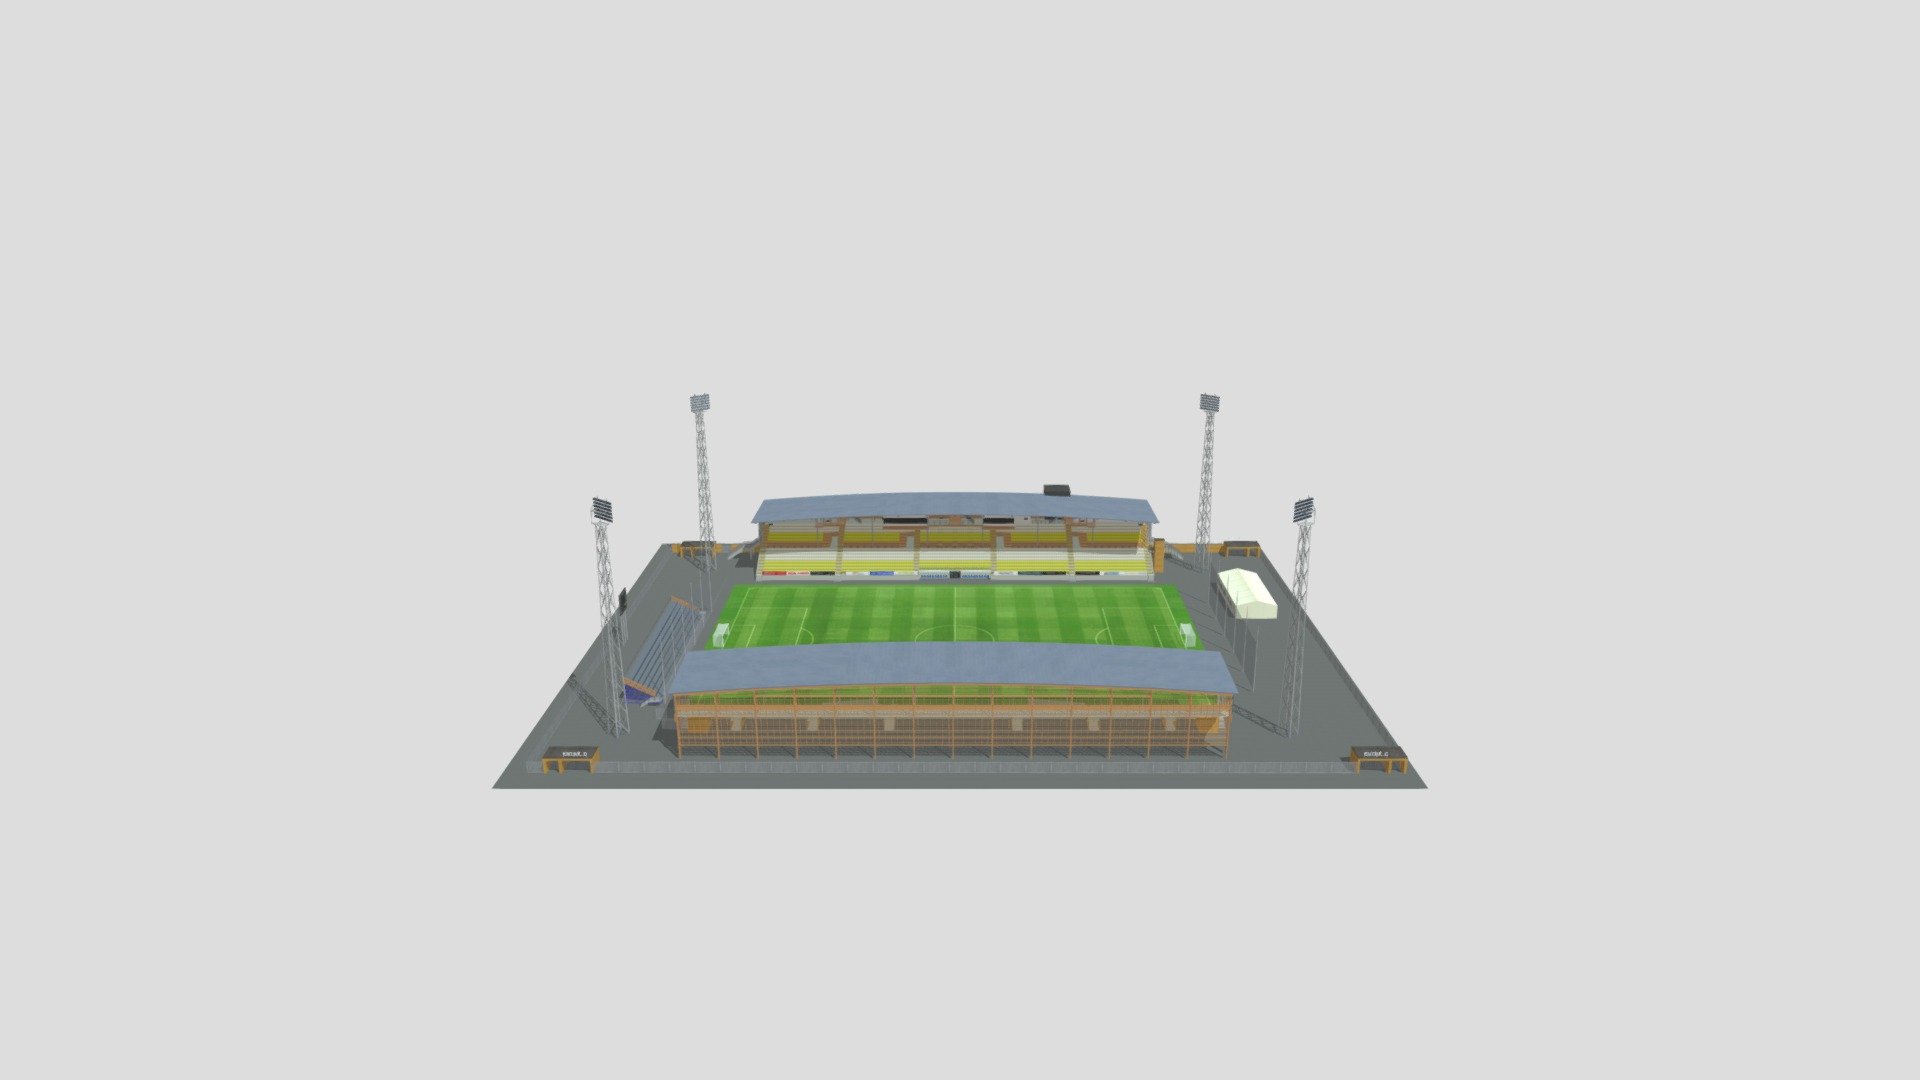 Hello everyone!
Today I present you Falcon Alkoholfri Arena, home ground of Falkenbergs FF, Sweden.
The stadium is created for a PC/video game (EA sports FIFA 14/16 for example) . The model is orignally created in Rhinoceros 3D v5.0, but it's compatible with v4.0 as well. The additional formats (except .blend format) are exported with Rhino 3D v5.0. All railings and fencing are 2D images with transparency set. The model is optimized for any kind of computer and video games. Light structure and high quality of detailization. The following formats are exported with Rhino 3D v5.0:

Rhinoceros (.3dm)
OBJ (.obj)
3D Studio (.3ds)
COLLADA (.dae)
SketchUp (.skp)
Autodesk (.fbx)
AutoCAD (.dwg)
AutoCAD Drawing Exchange (.dxf)
Ply (.ply)
Blender (.blend) - Falcon Alkoholfri Stadium - 3D model by gonzaga24 3d model